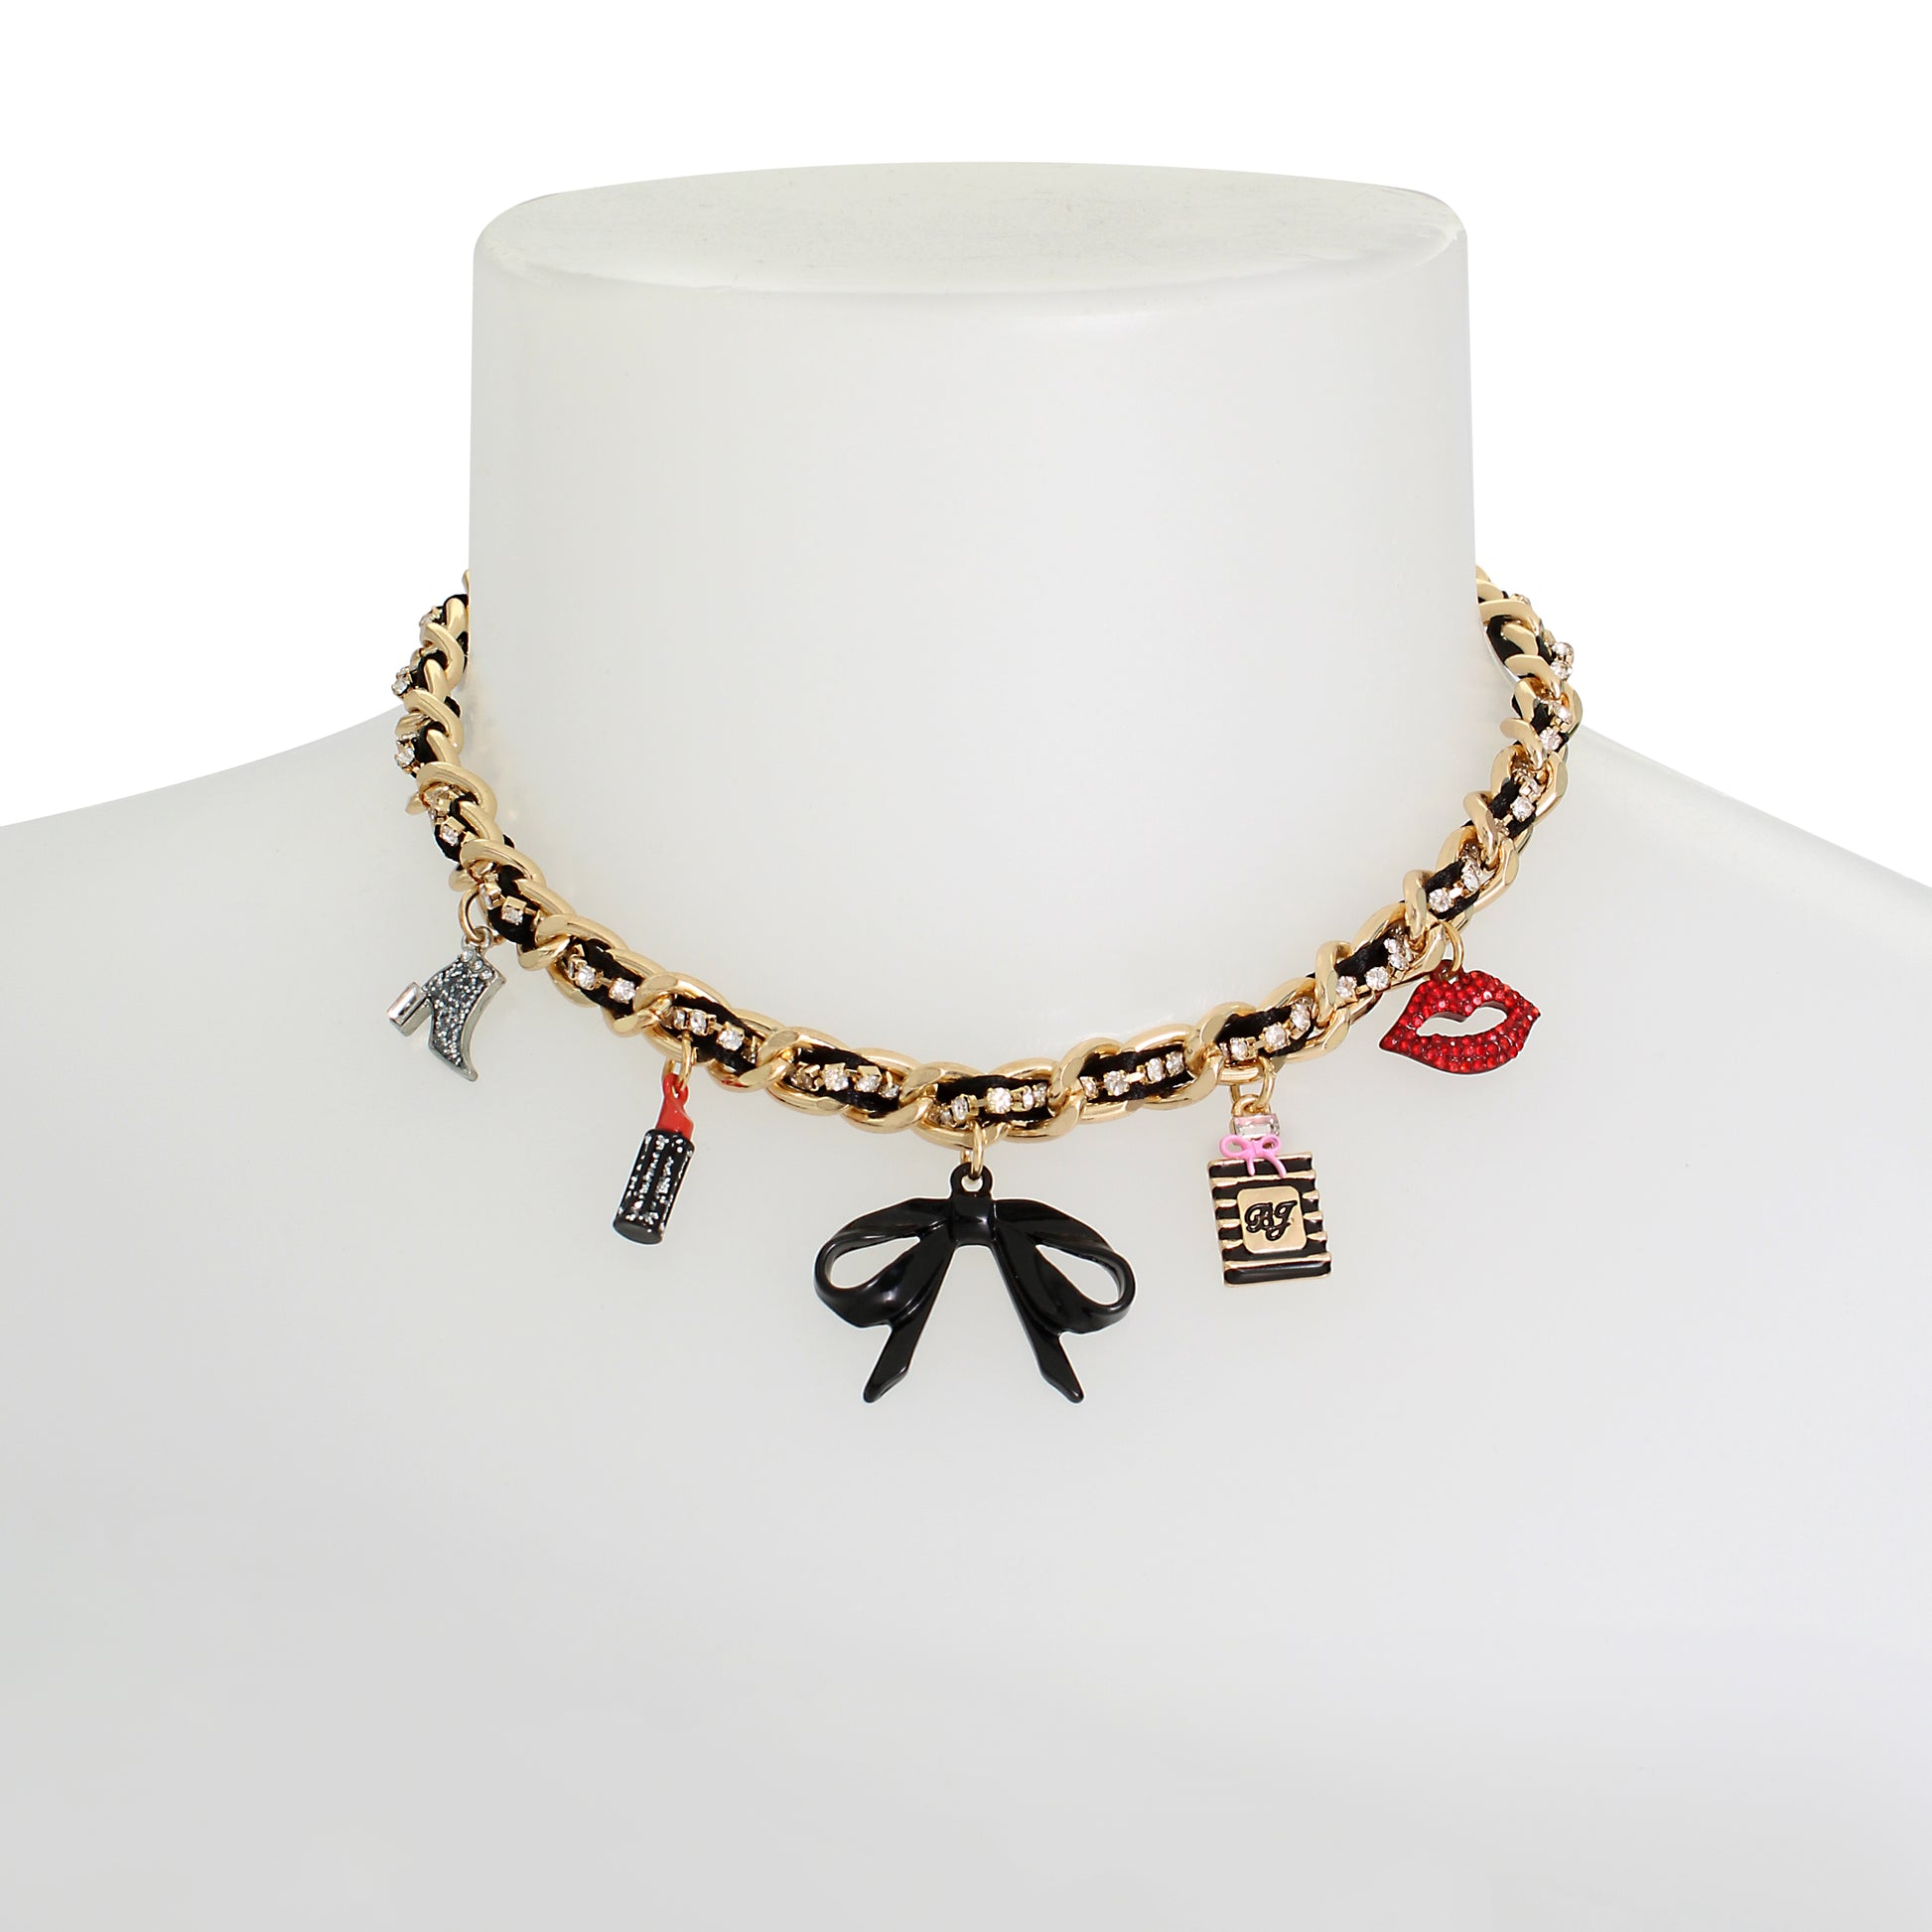 Betsey Johnson Going All Out Charm Chain Necklace